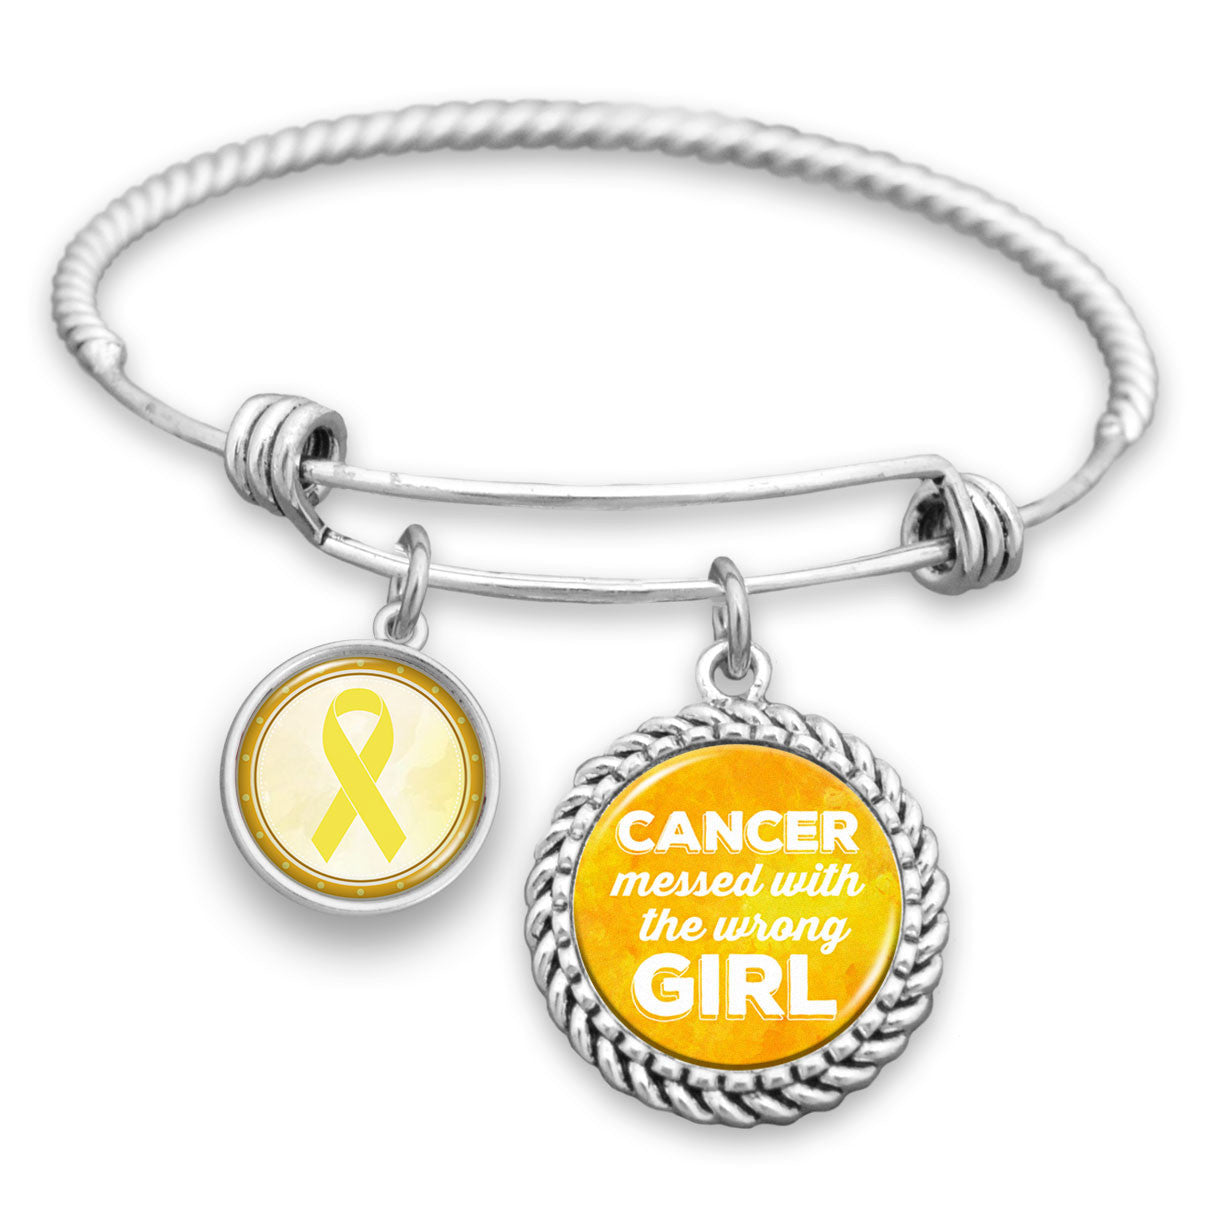 Childhood Cancer Awareness "Cancer Messed With The Wrong Girl" Charm Bracelet